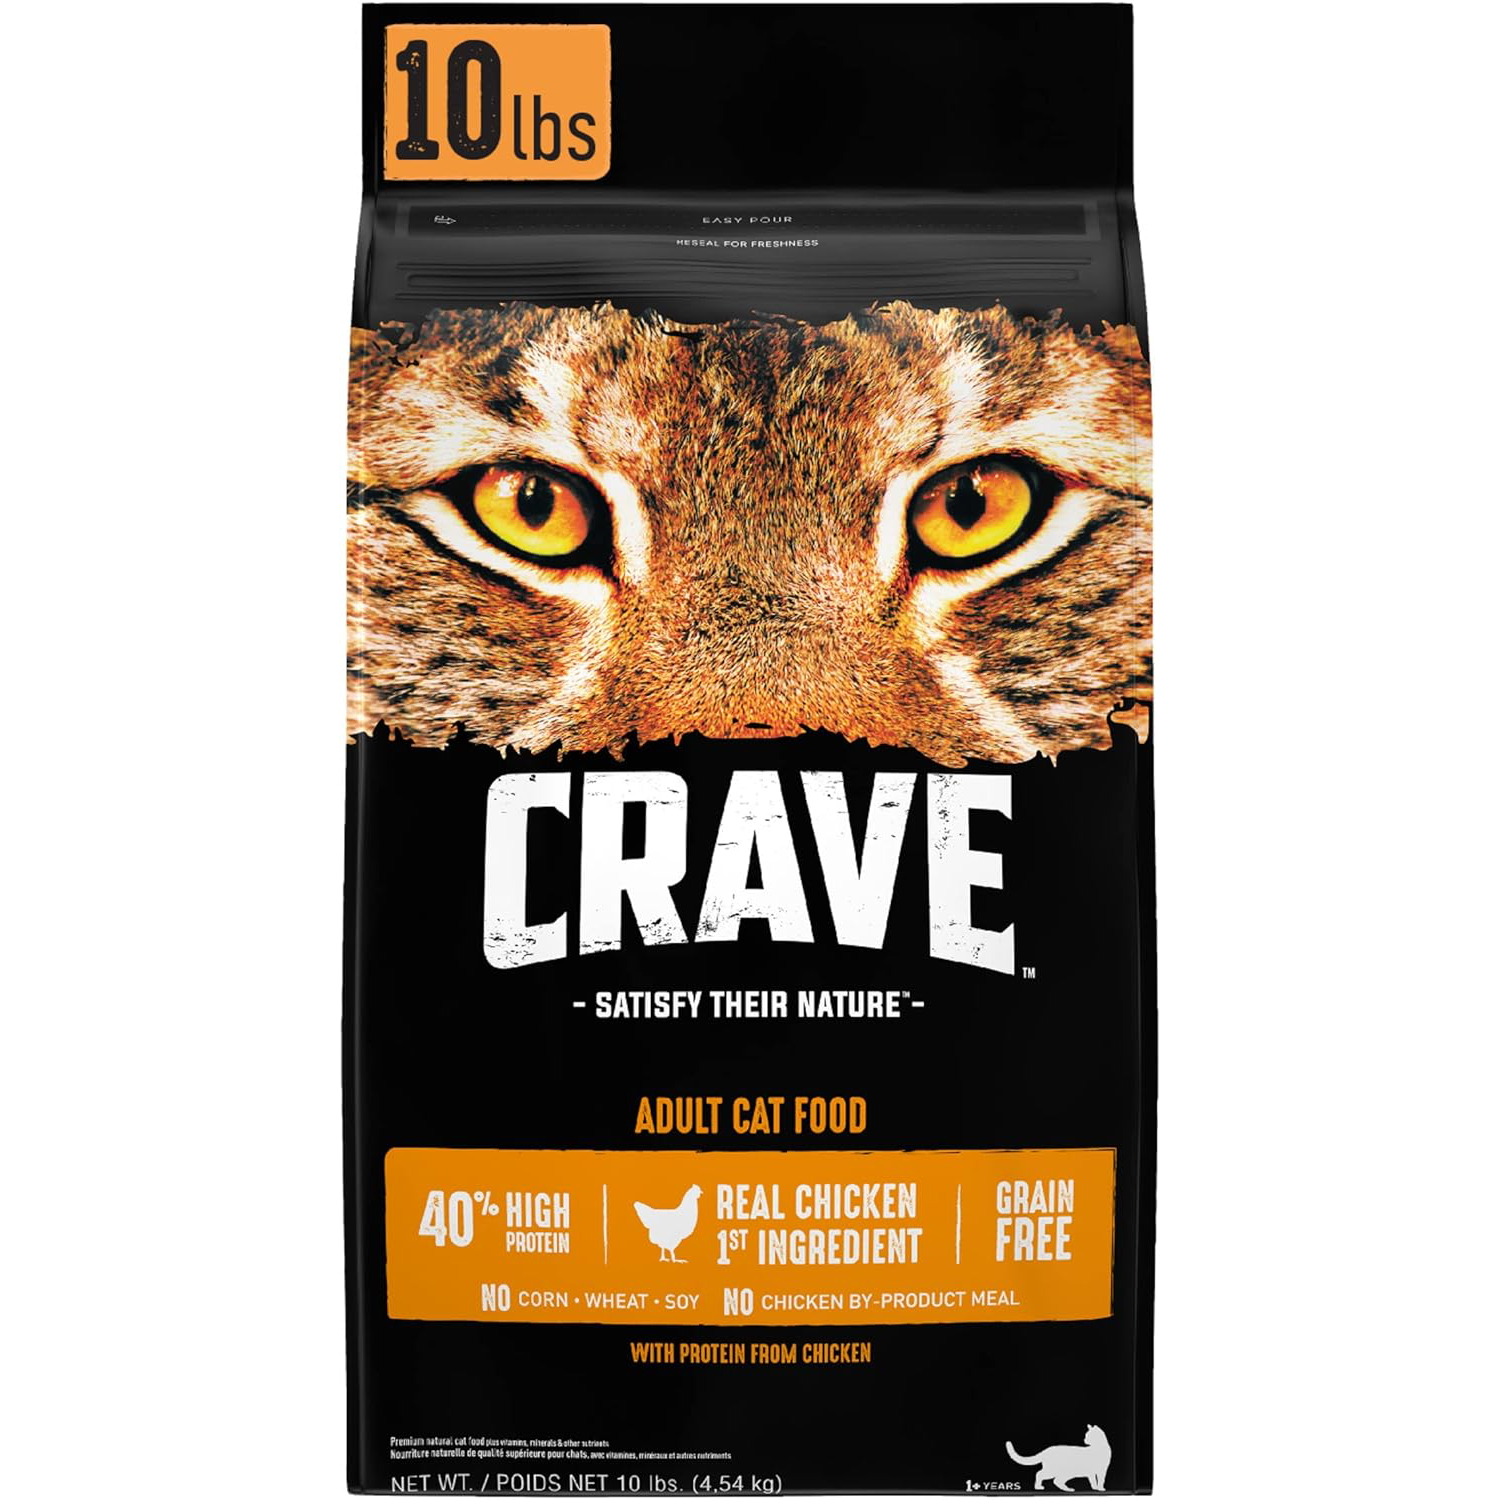 Crave Grain Free with Protein from Chicken Dry Adult Cat Food